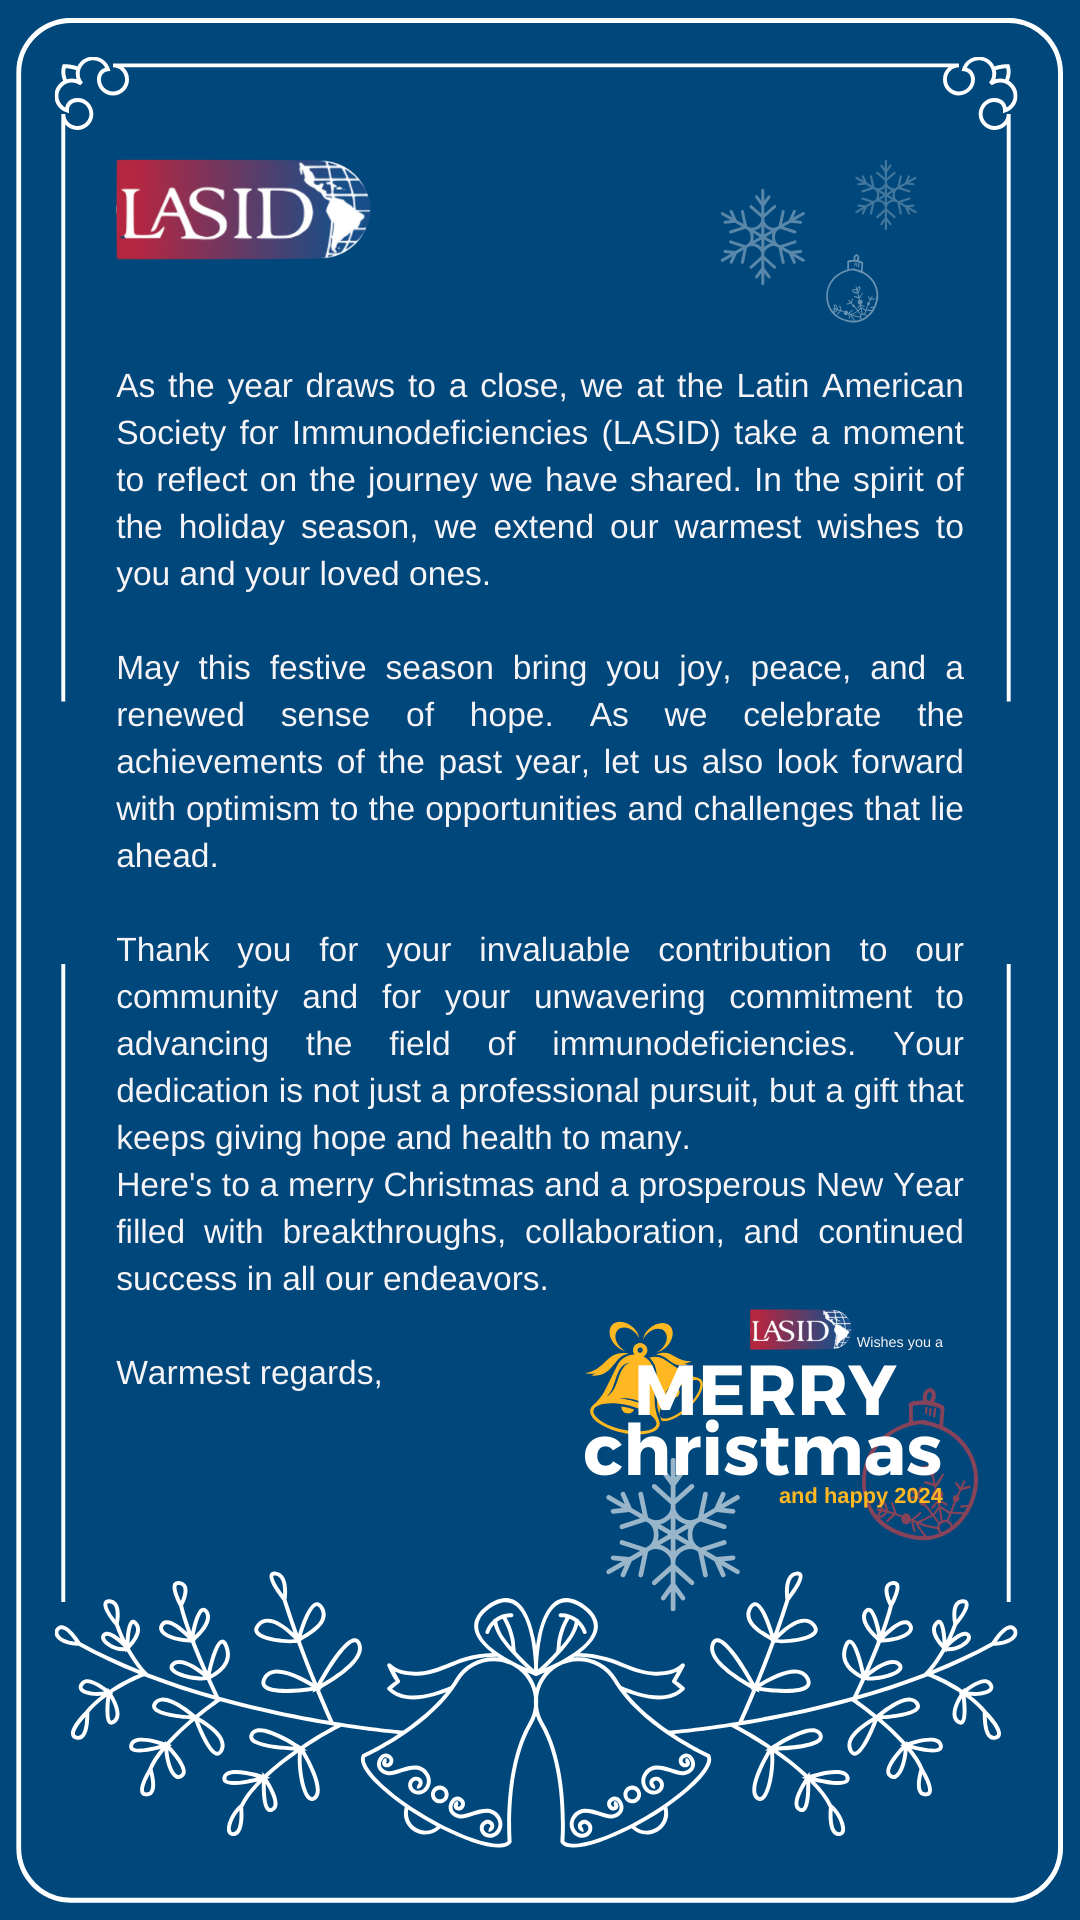 As the year draws to a close, we at the Latin American Society for Immunodeficiencies (LASID) take a moment to reflect on the journey we have shared. In the spirit of the holiday season, we extend our warmest wishes to you and your loved ones.

May this festive season bring you joy, peace, and a renewed sense of hope. As we celebrate the achievements of the past year, let us also look forward with optimism to the opportunities and challenges that lie ahead.

Thank you for your invaluable contribution to our community and for your unwavering commitment to advancing the field of immunodeficiencies. Your dedication is not just a professional pursuit, but a gift that keeps giving hope and health to many.
Here's to a merry Christmas and a prosperous New Year filled with breakthroughs, collaboration, and continued success in all our endeavors.

Warmest regards,